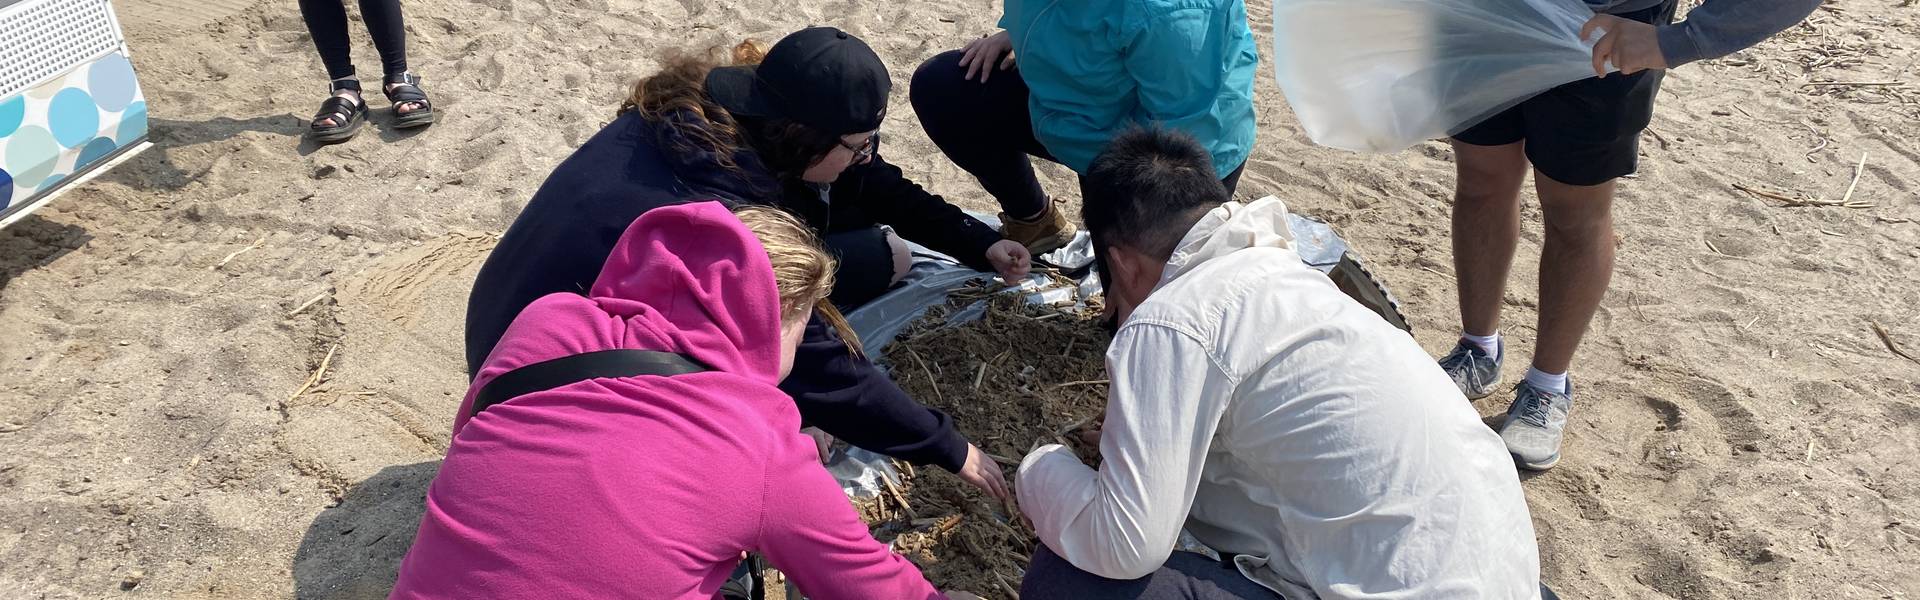 Students crouch on a sandy beach and search straw-like artifacts inside a plastic bag